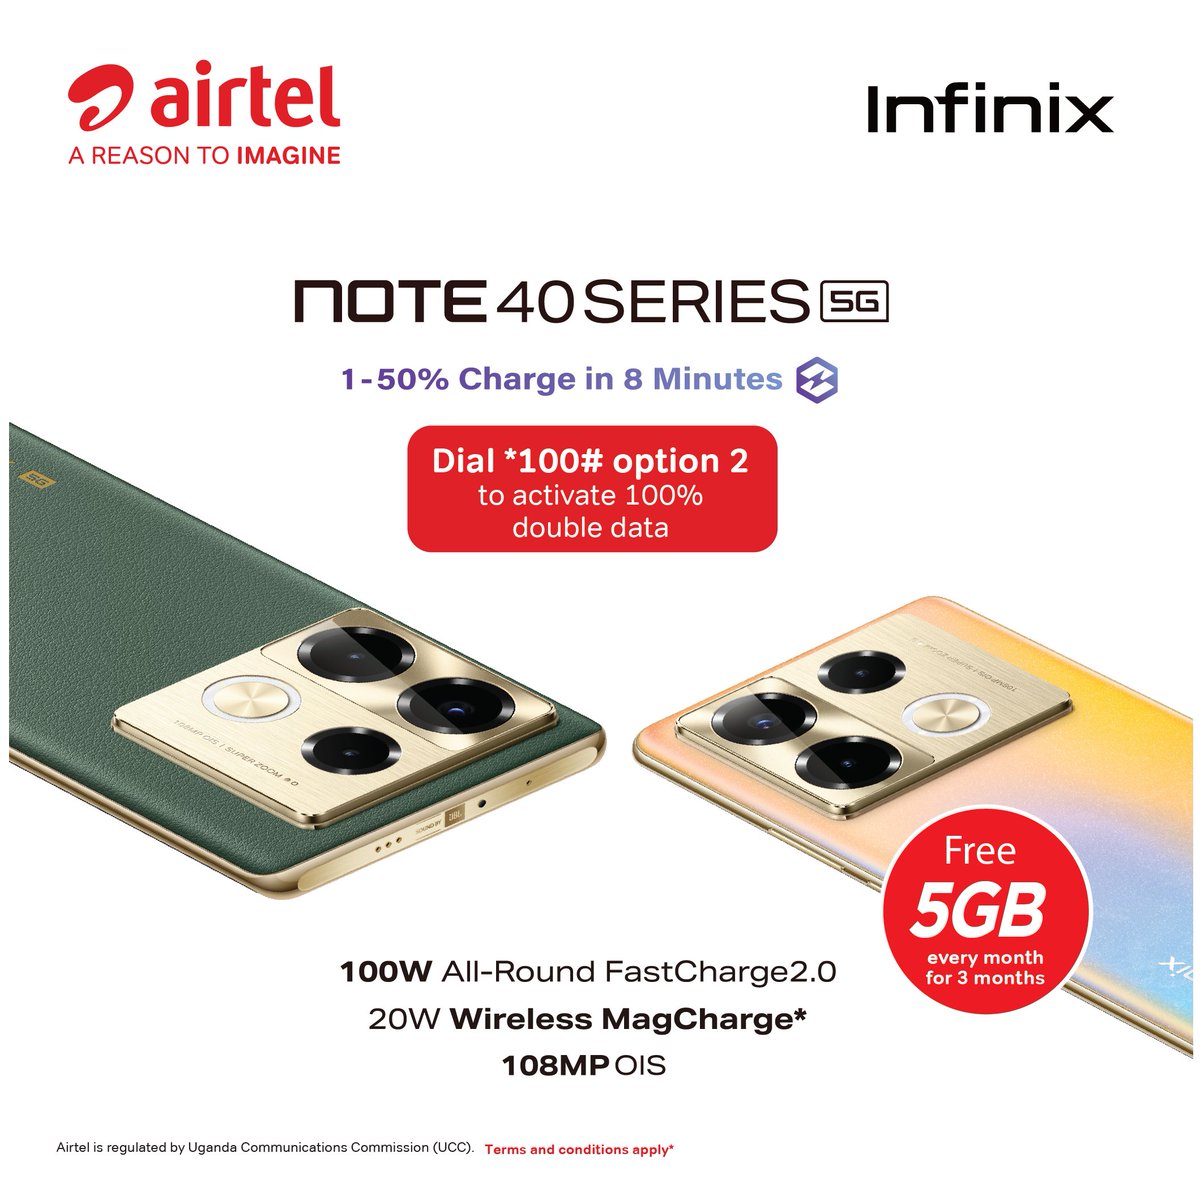 The #InfinixNote40Series comes loaded with 5GB of Airtel Data every month for 3 months Dial *100# option 2 to enjoy 100% double data on your weekly and monthly bundle purchases. #AirtelXInfinix #DoubleData T&Cs Apply.